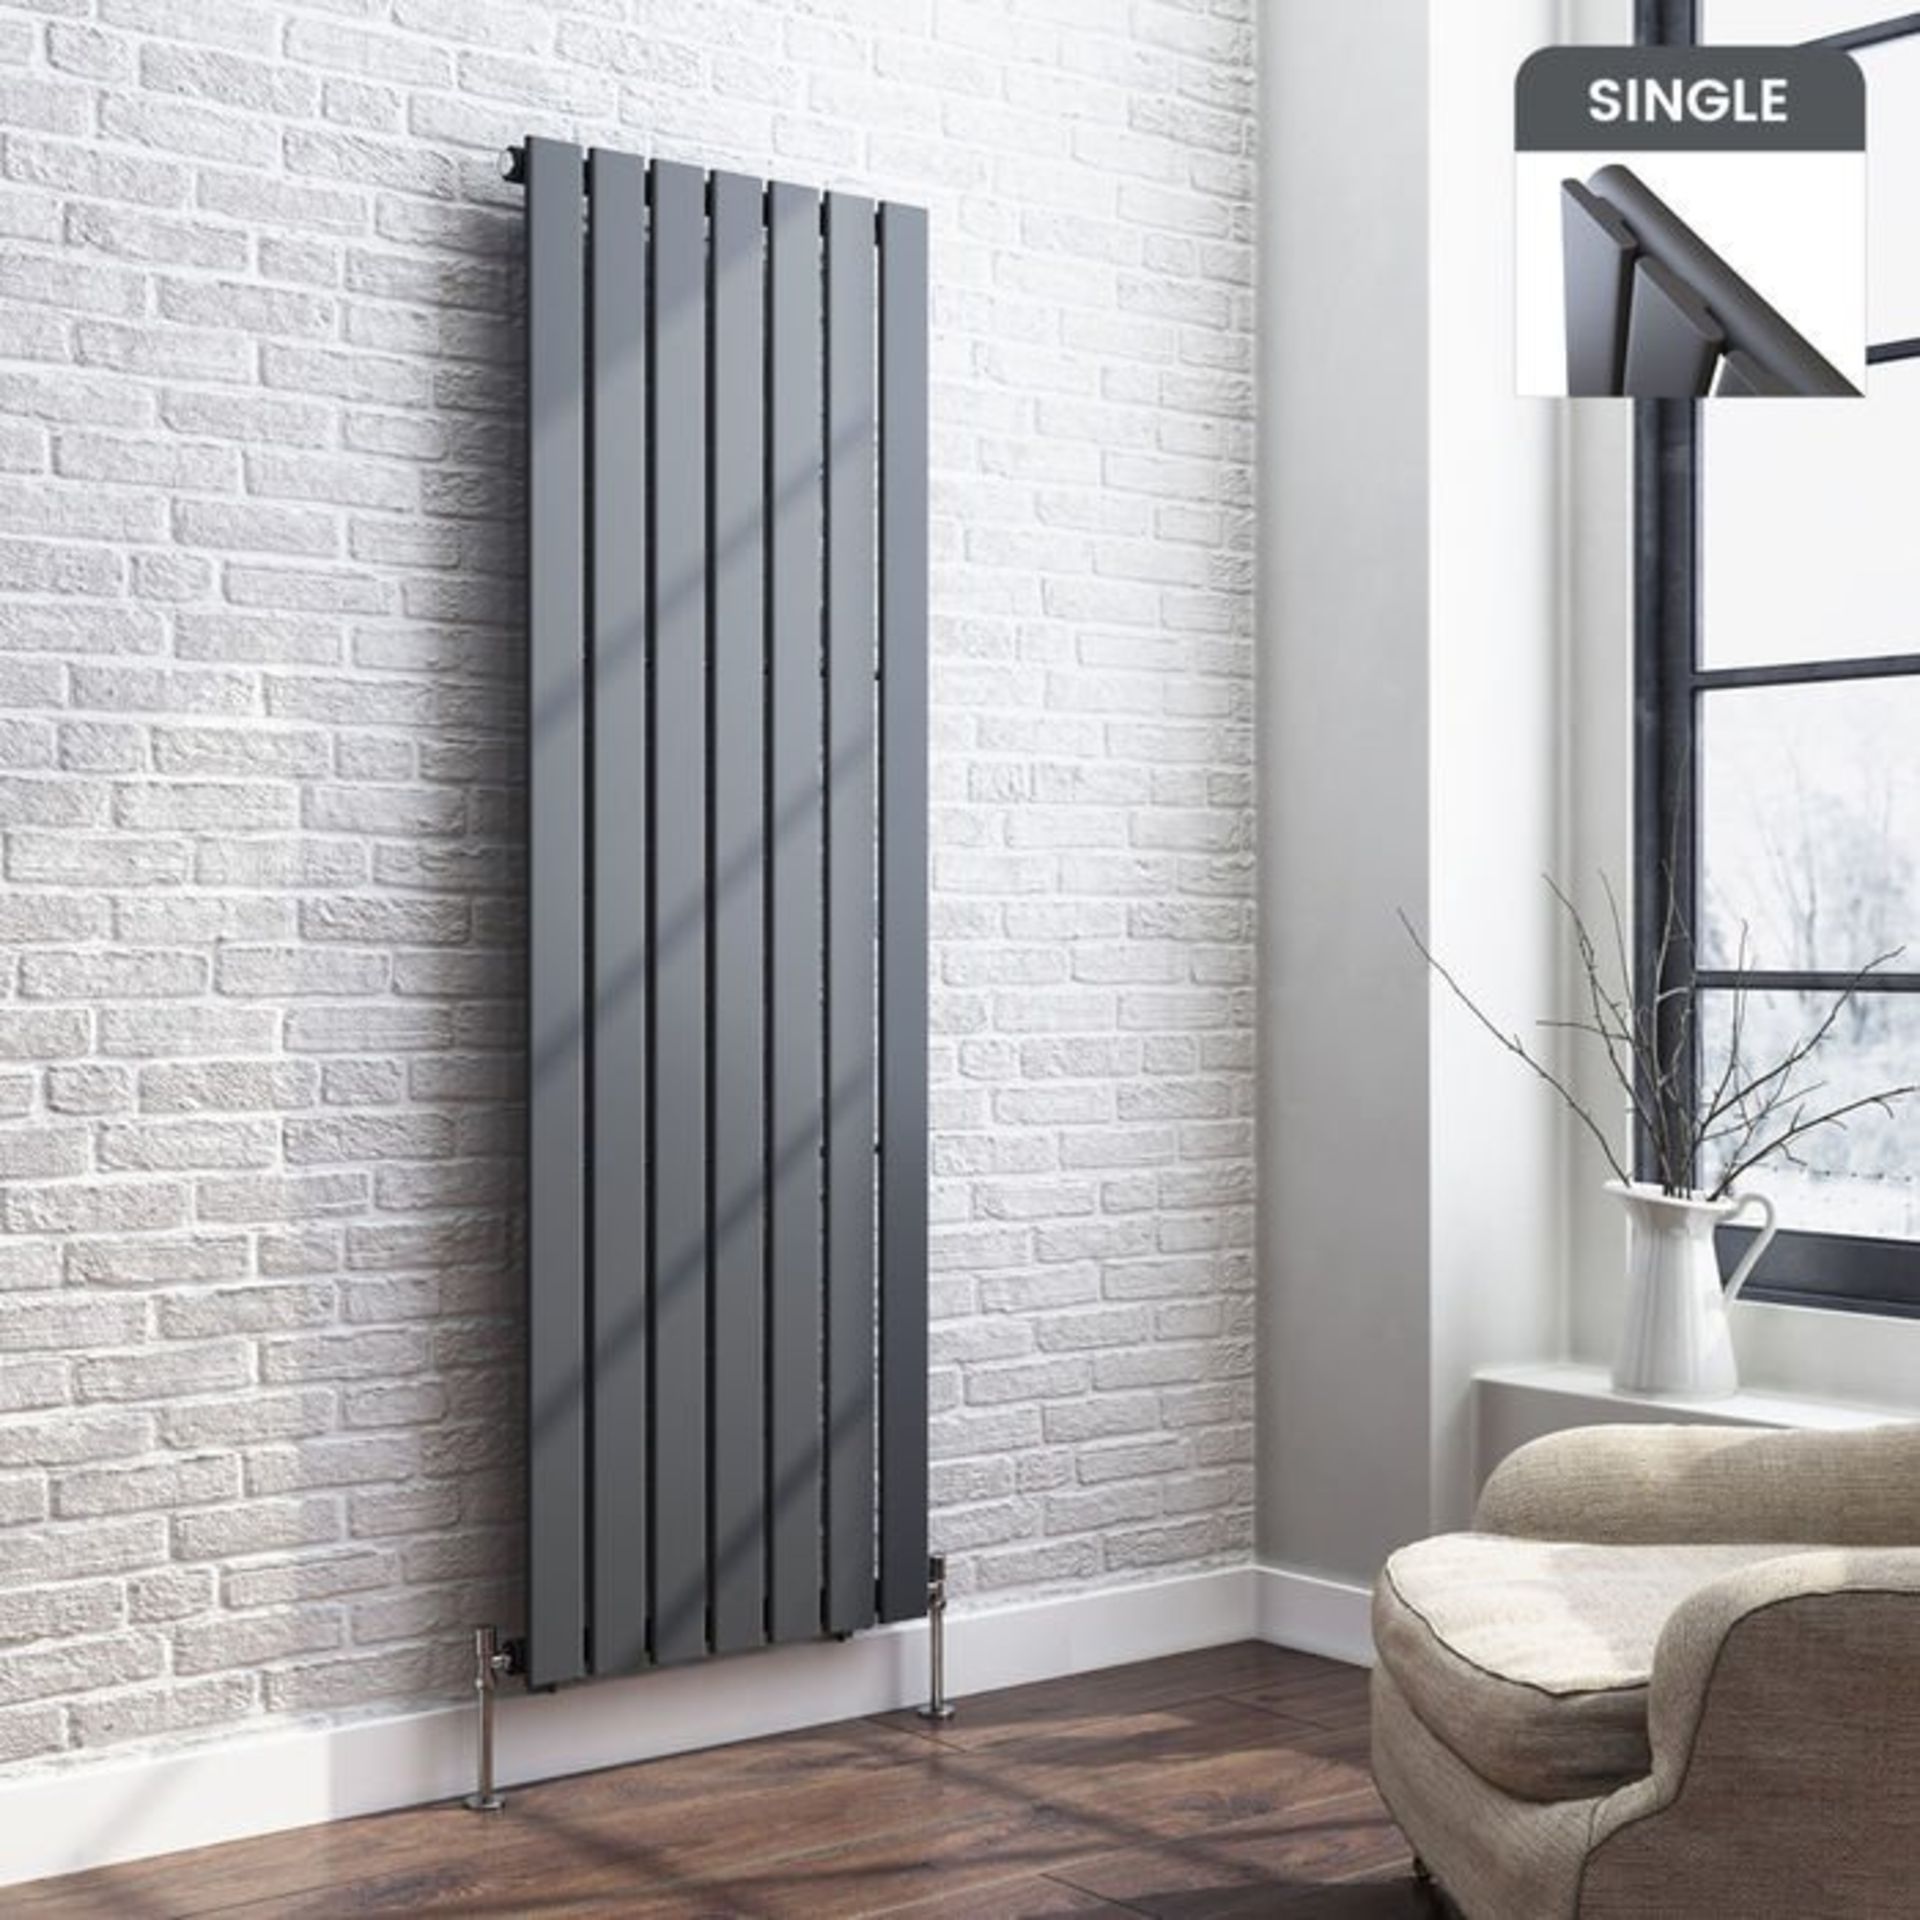 (S73) 1600x532mm Anthracite Single Flat Panel Vertical Radiator RRP £174.99 Low carbon steel, high